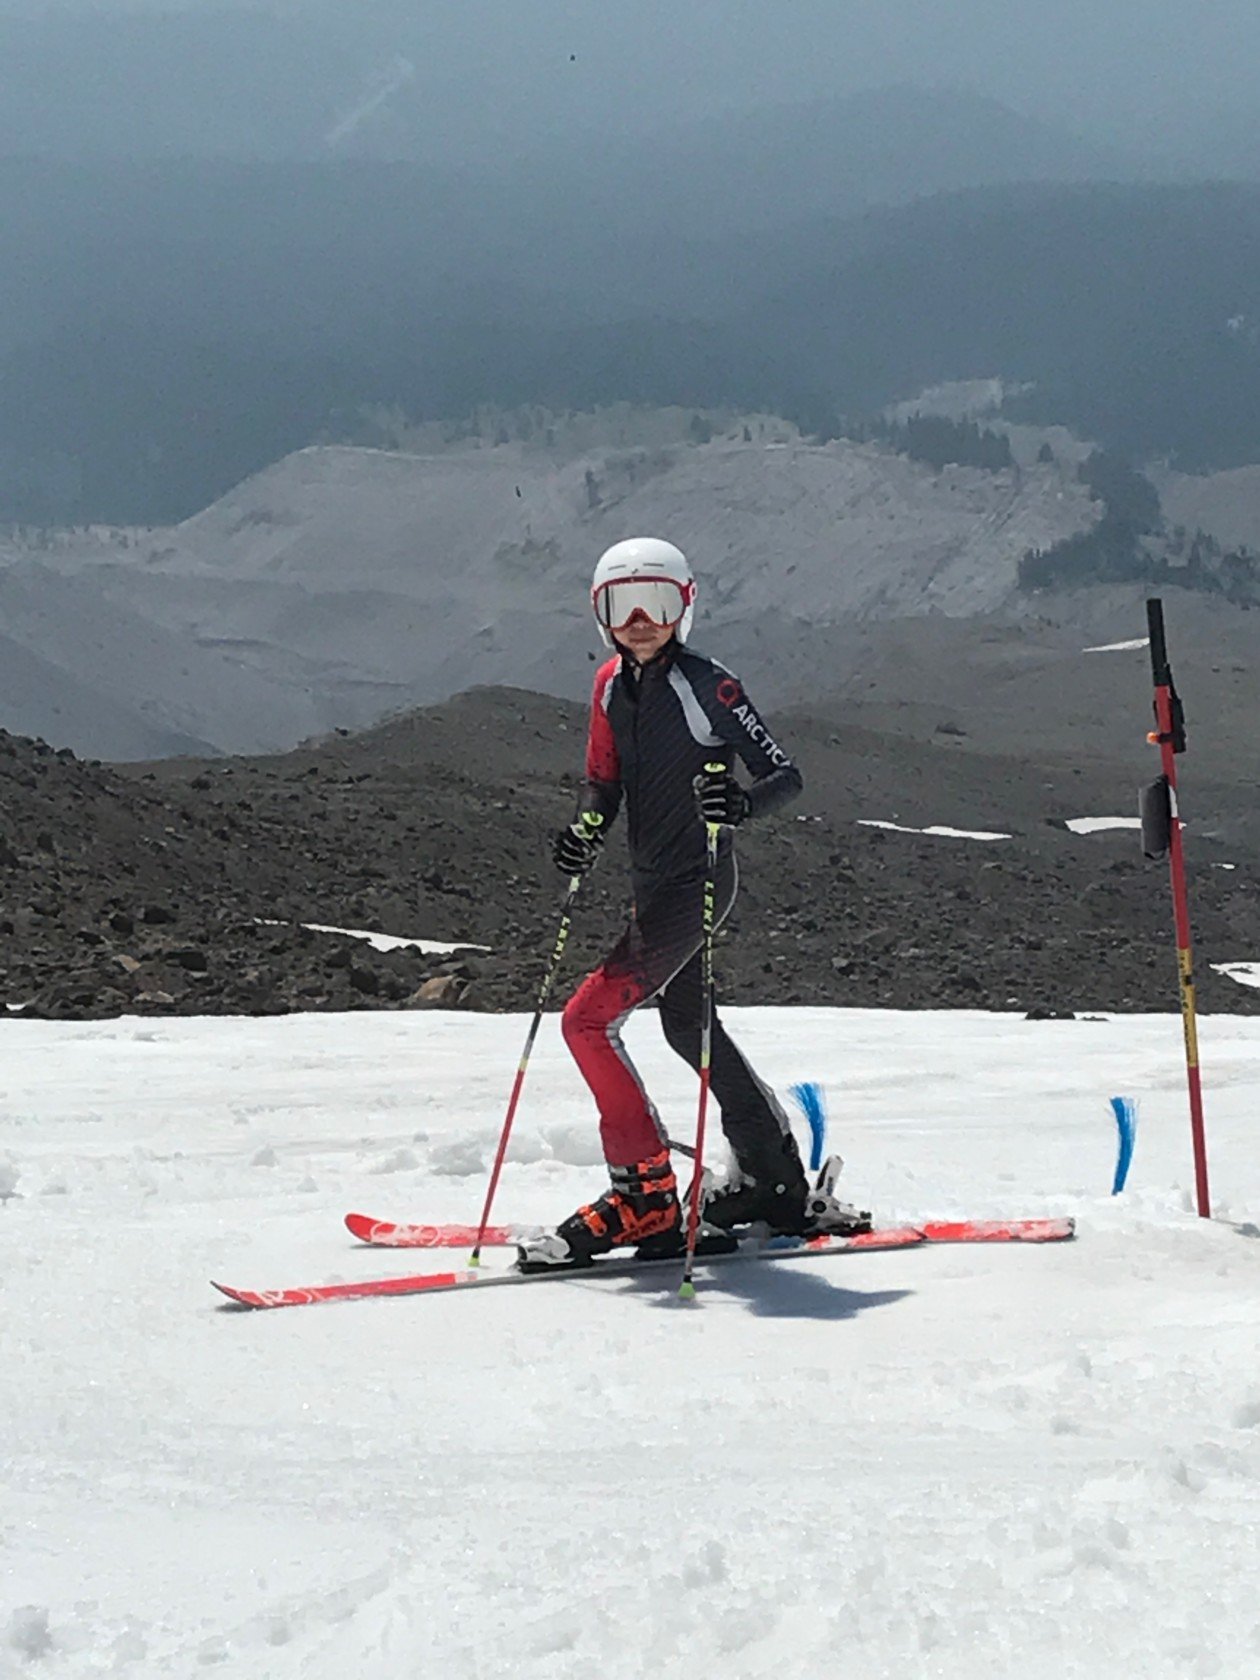 Young ski racer at Mt Hood wearing an essential items from his summer ski racing kit - a speed suit.